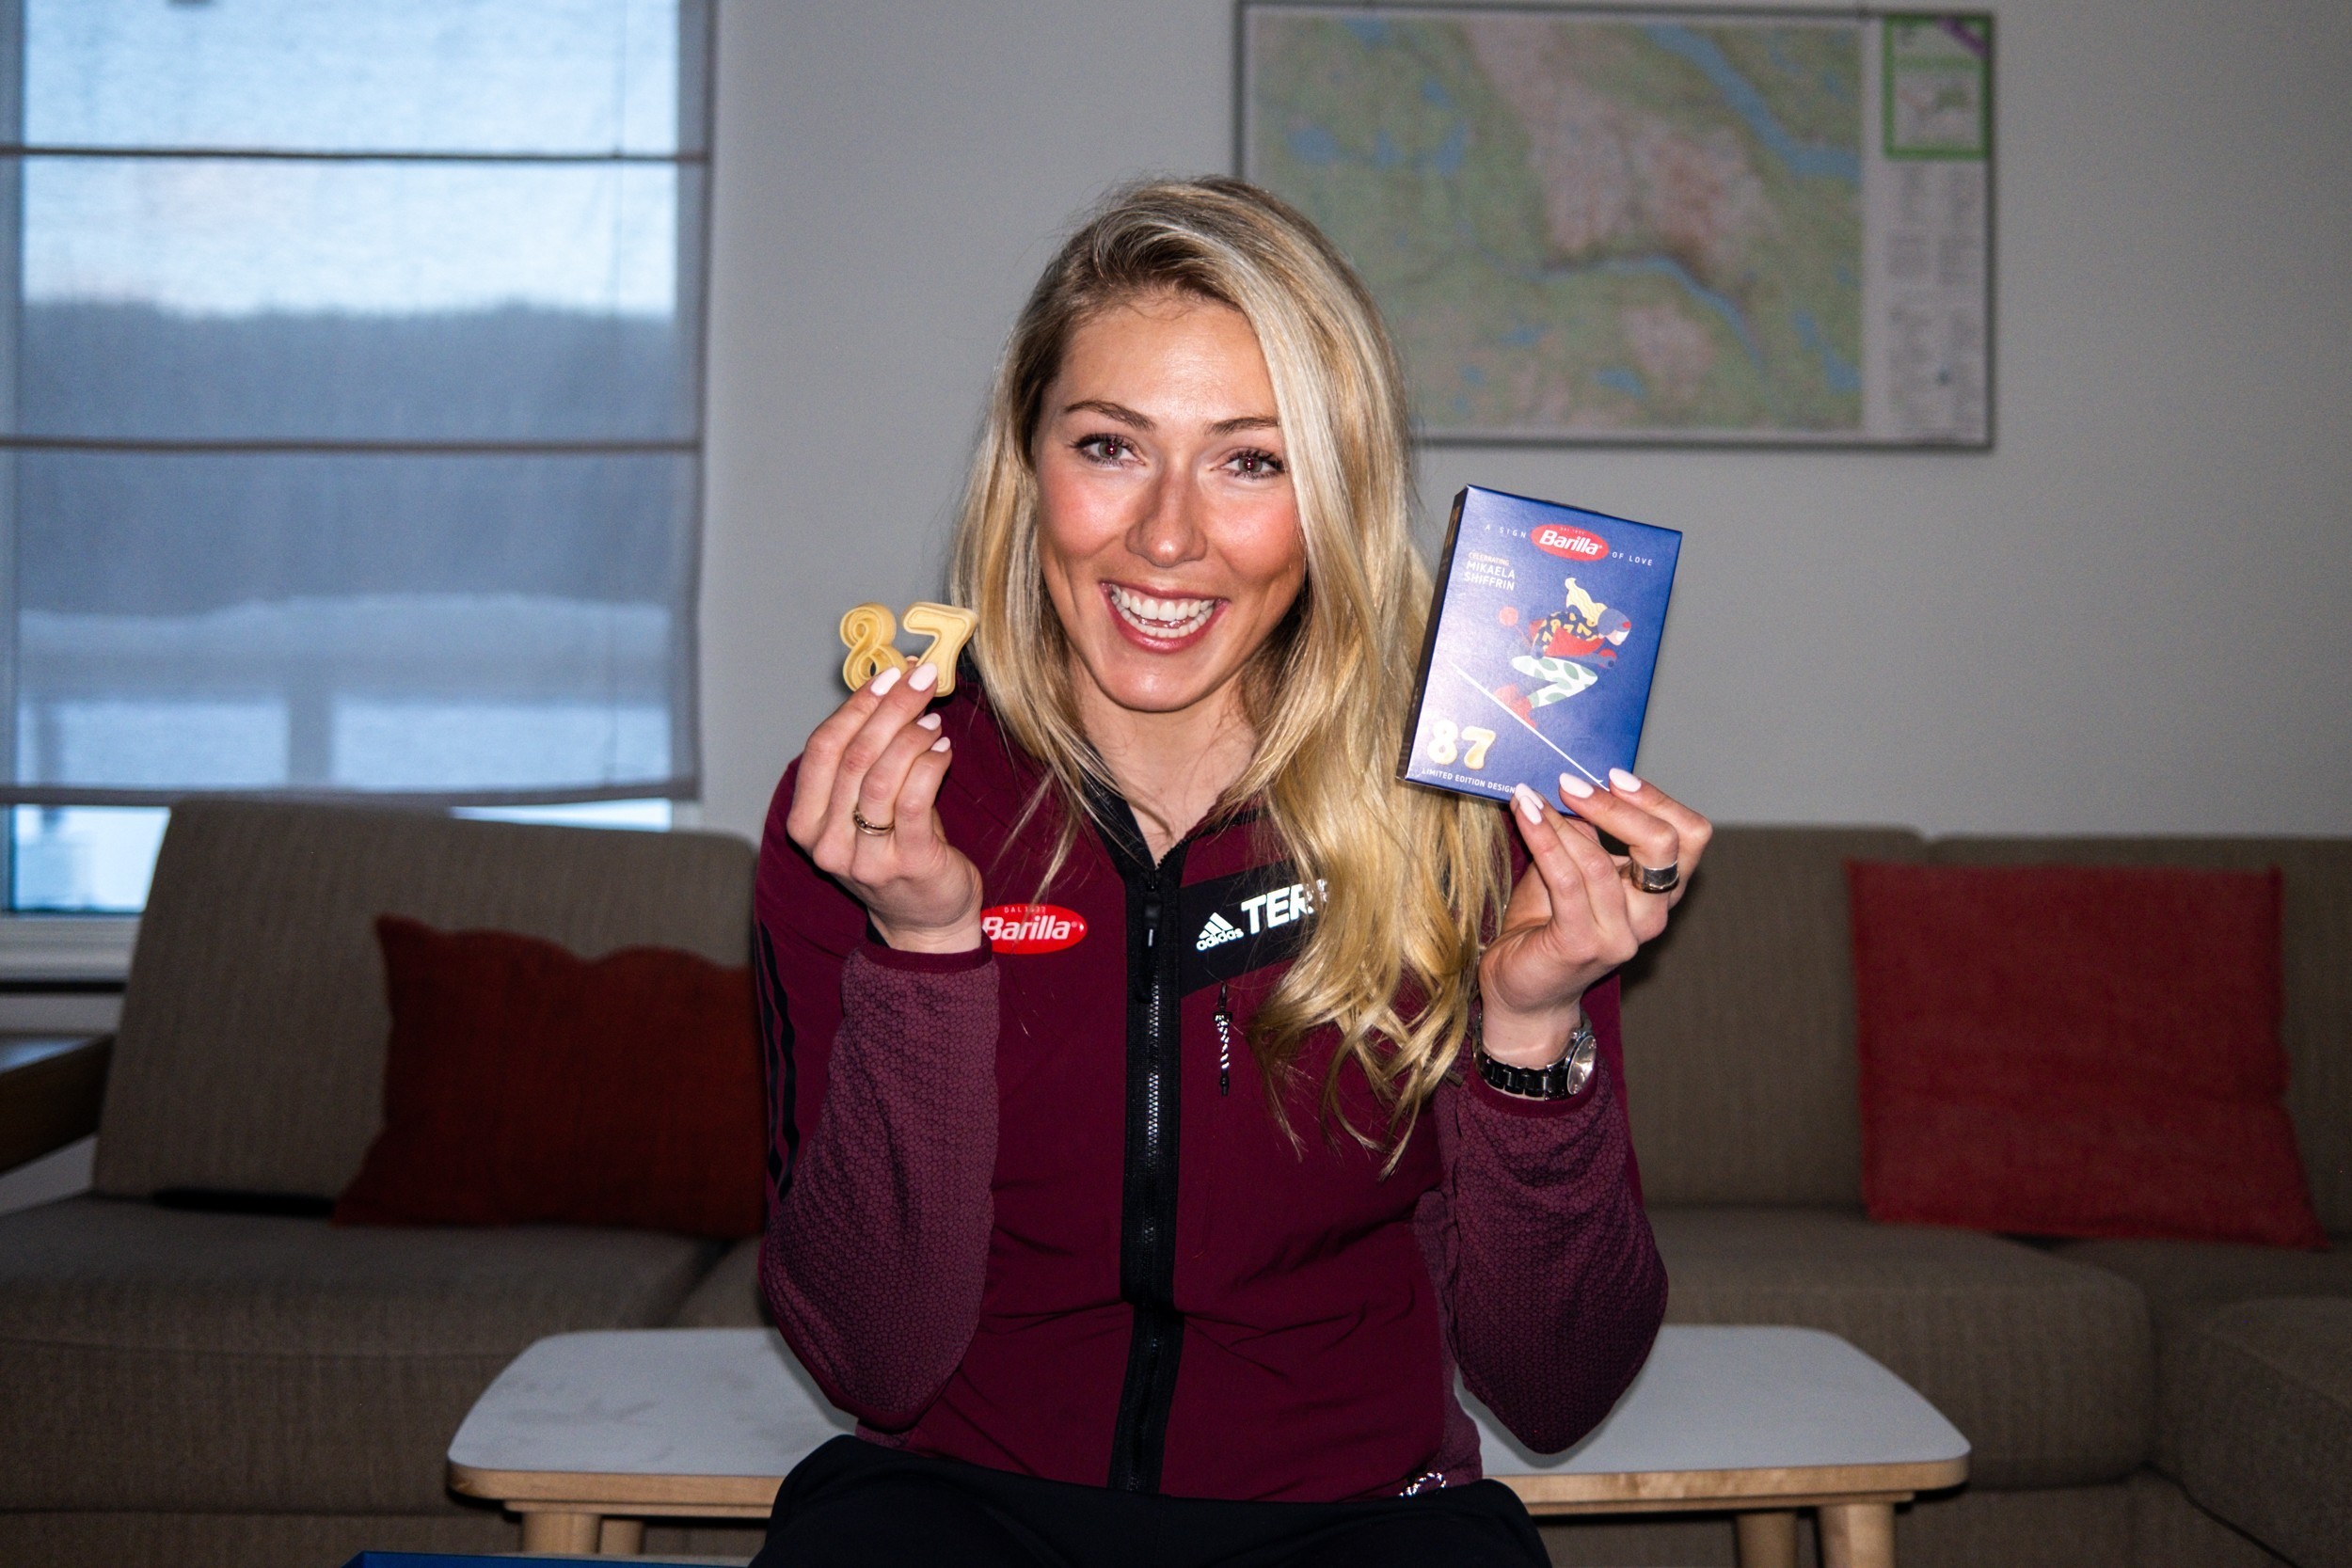 Barilla & Mikaela Shiffrin: Greatness starts with a great recipe - Pack No. 59